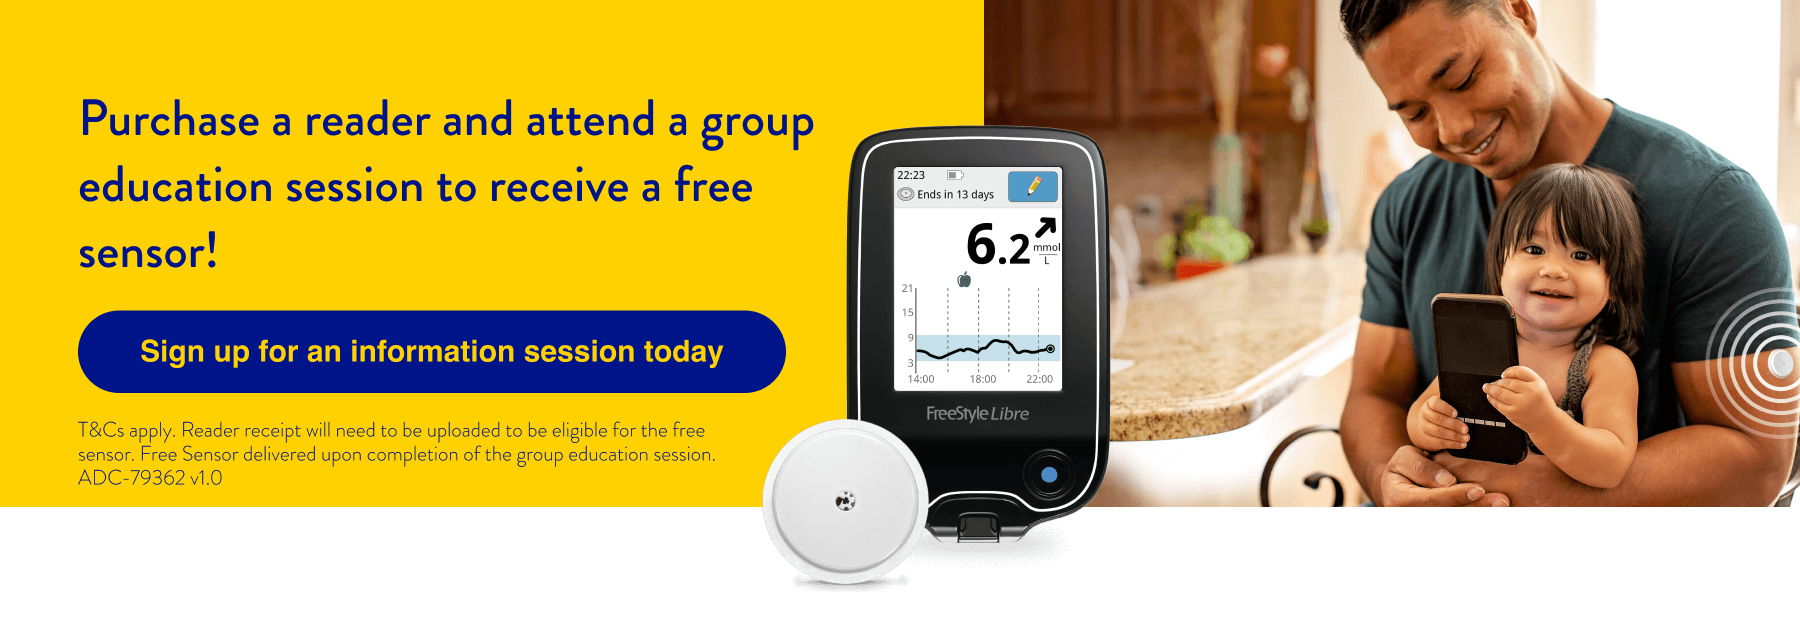 Purchase a reader and attend a group education session to receive a free sensor - Sign up for an information session today